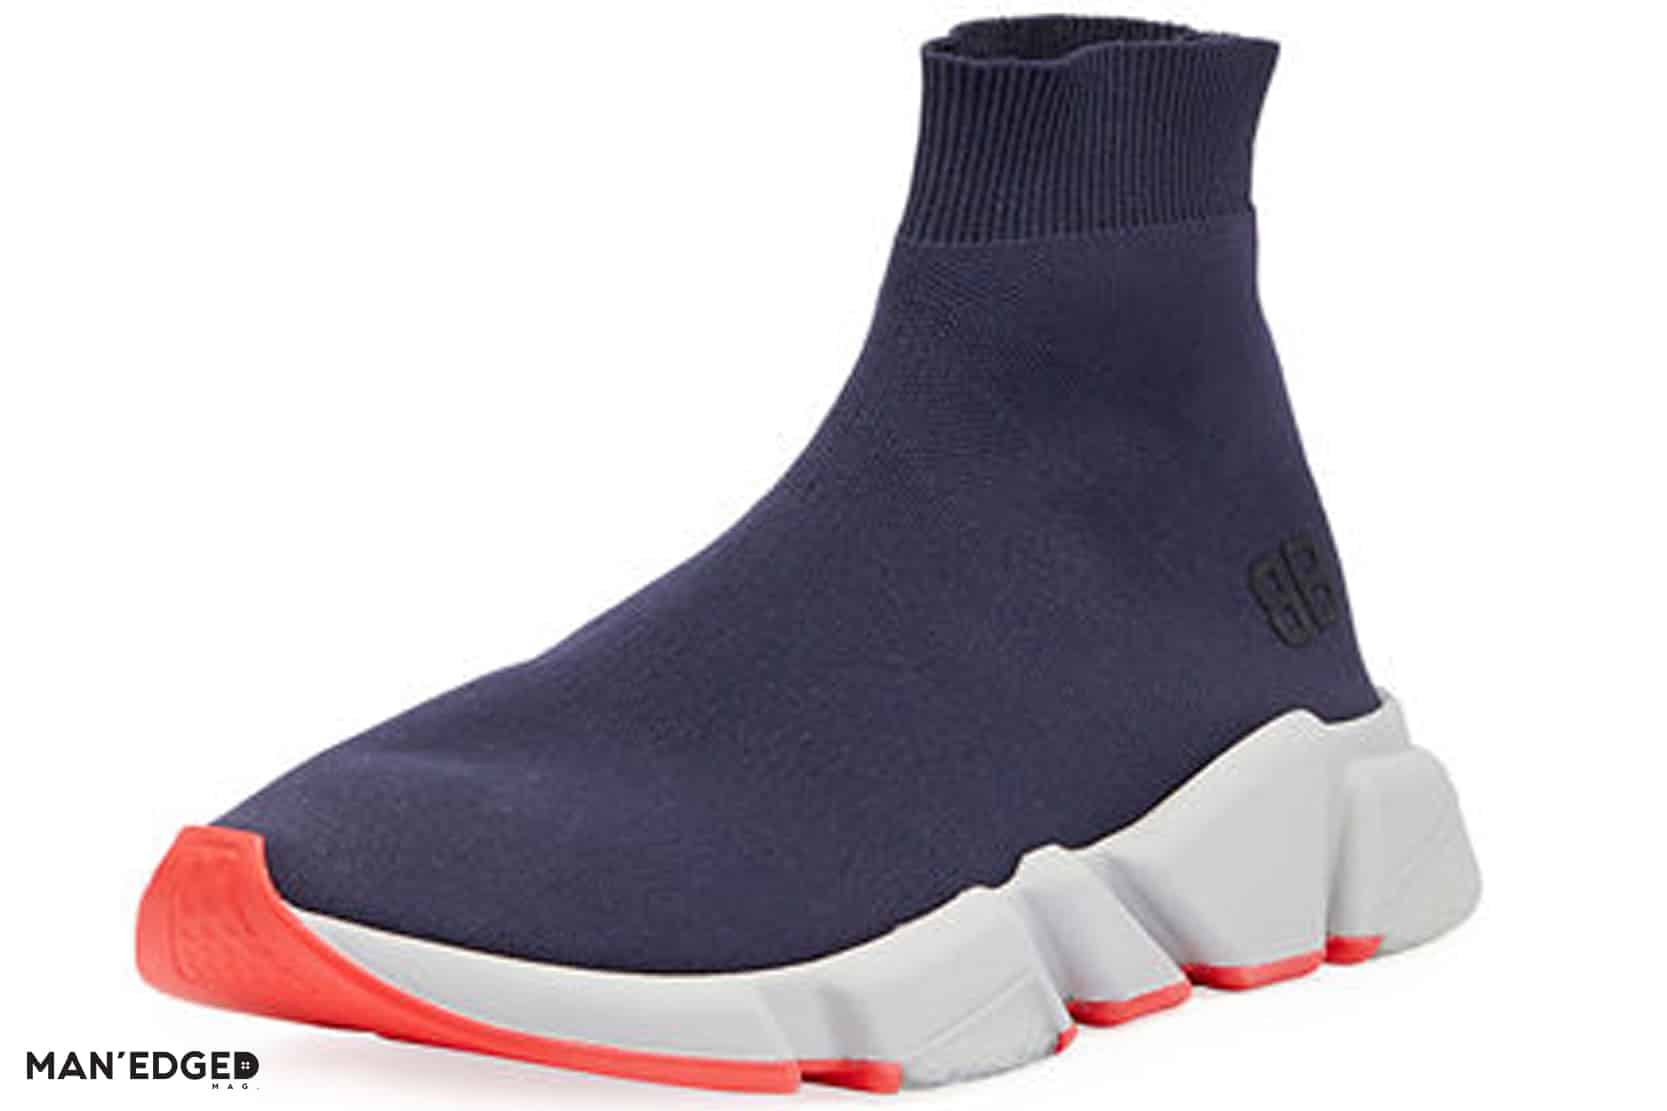 Gift ideas for the streetwear snob featuring the men's trainer by Balenciaga